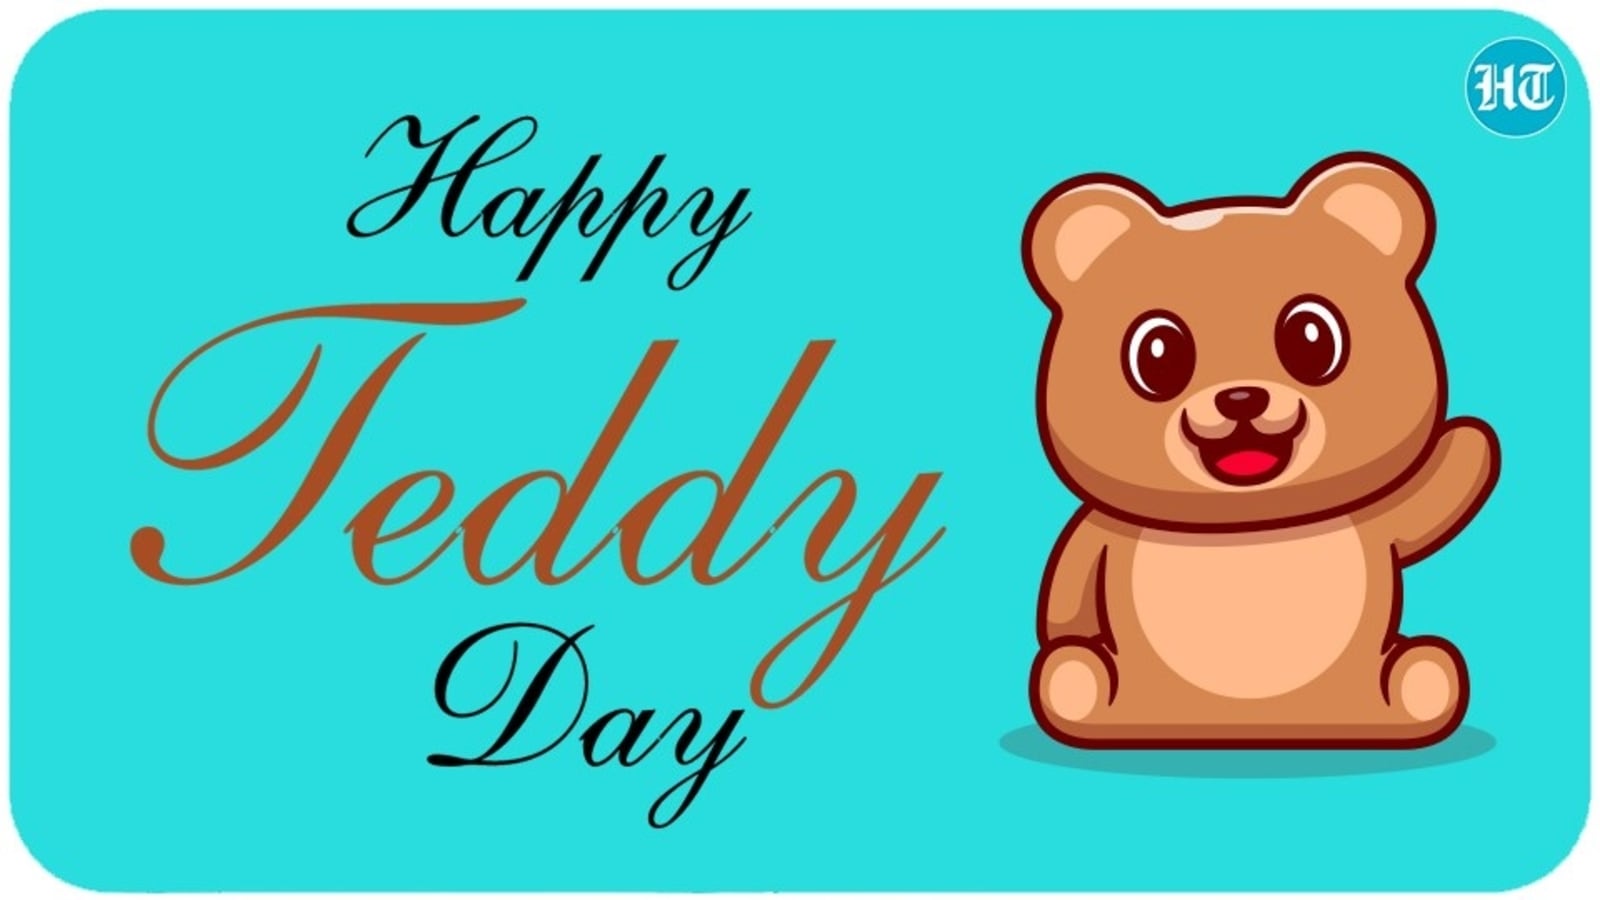 Happy Teddy Day 2022: Wishes, images, messages to share with your ...